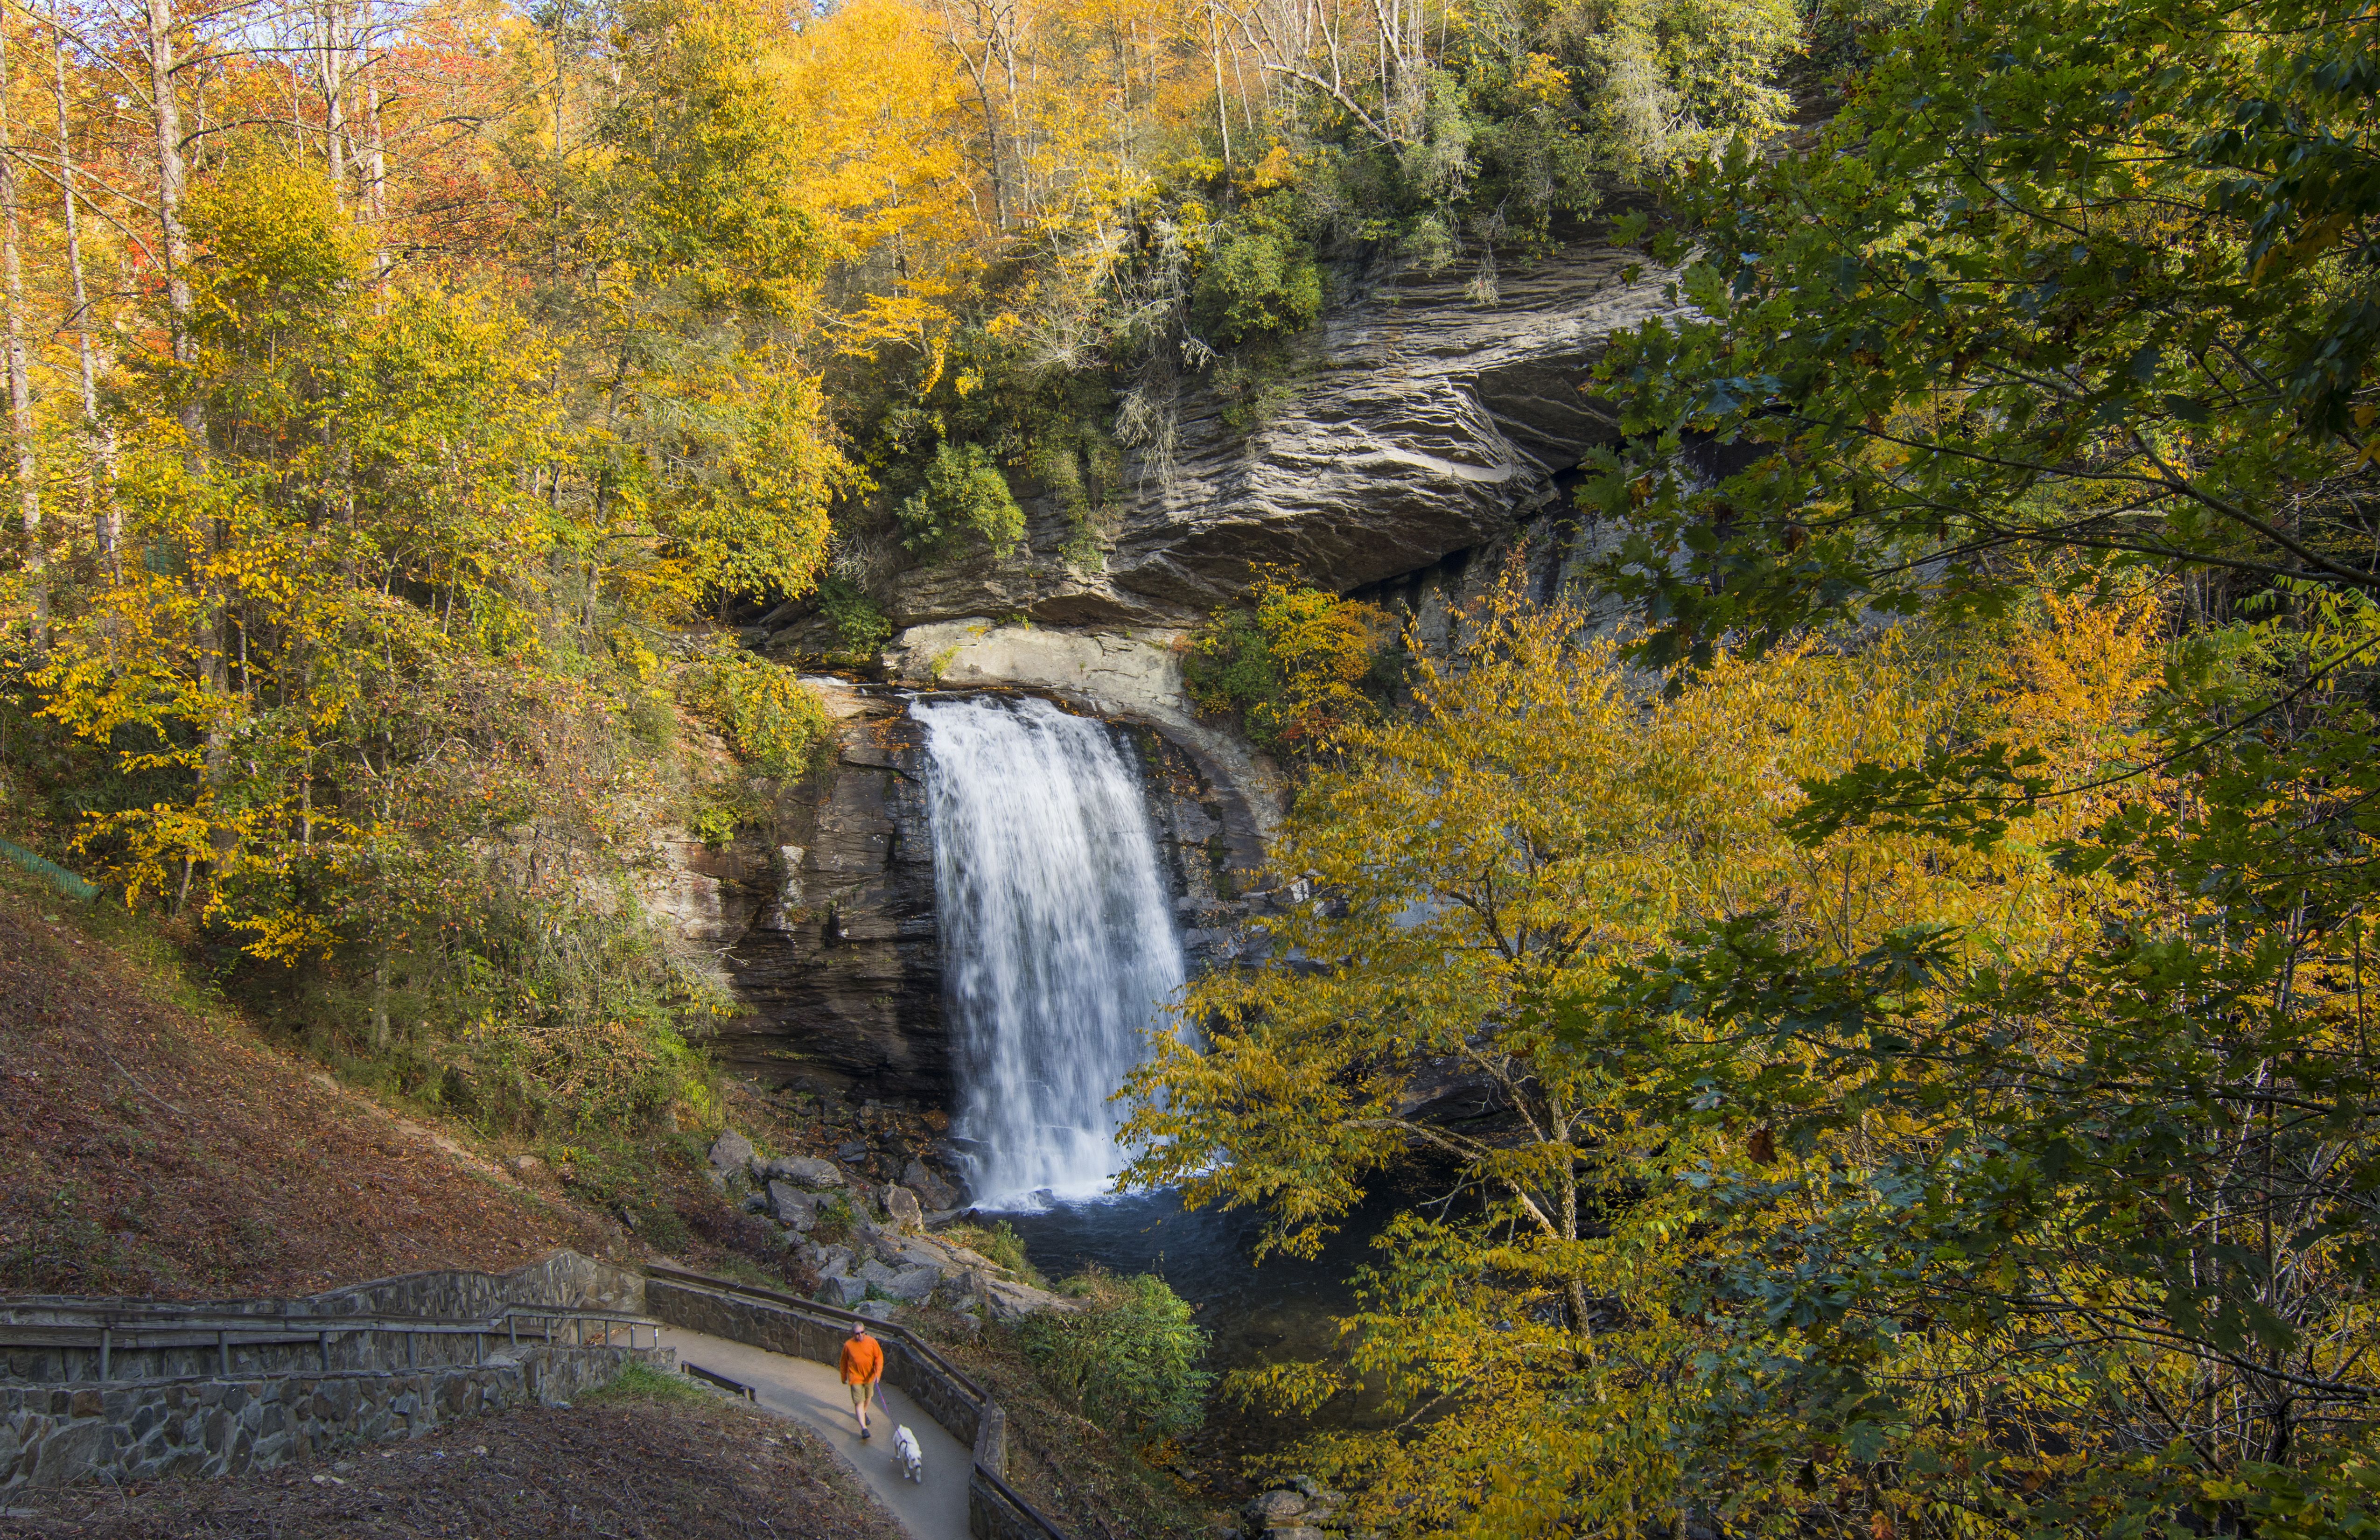 Brevard North Carolina Looking Glass Waterfall near Asheville with Fall Colors in Pisgah National Forest on Blue Ridge Parkway. (Photo by: Education Images/Universal Images Group via Getty Images)